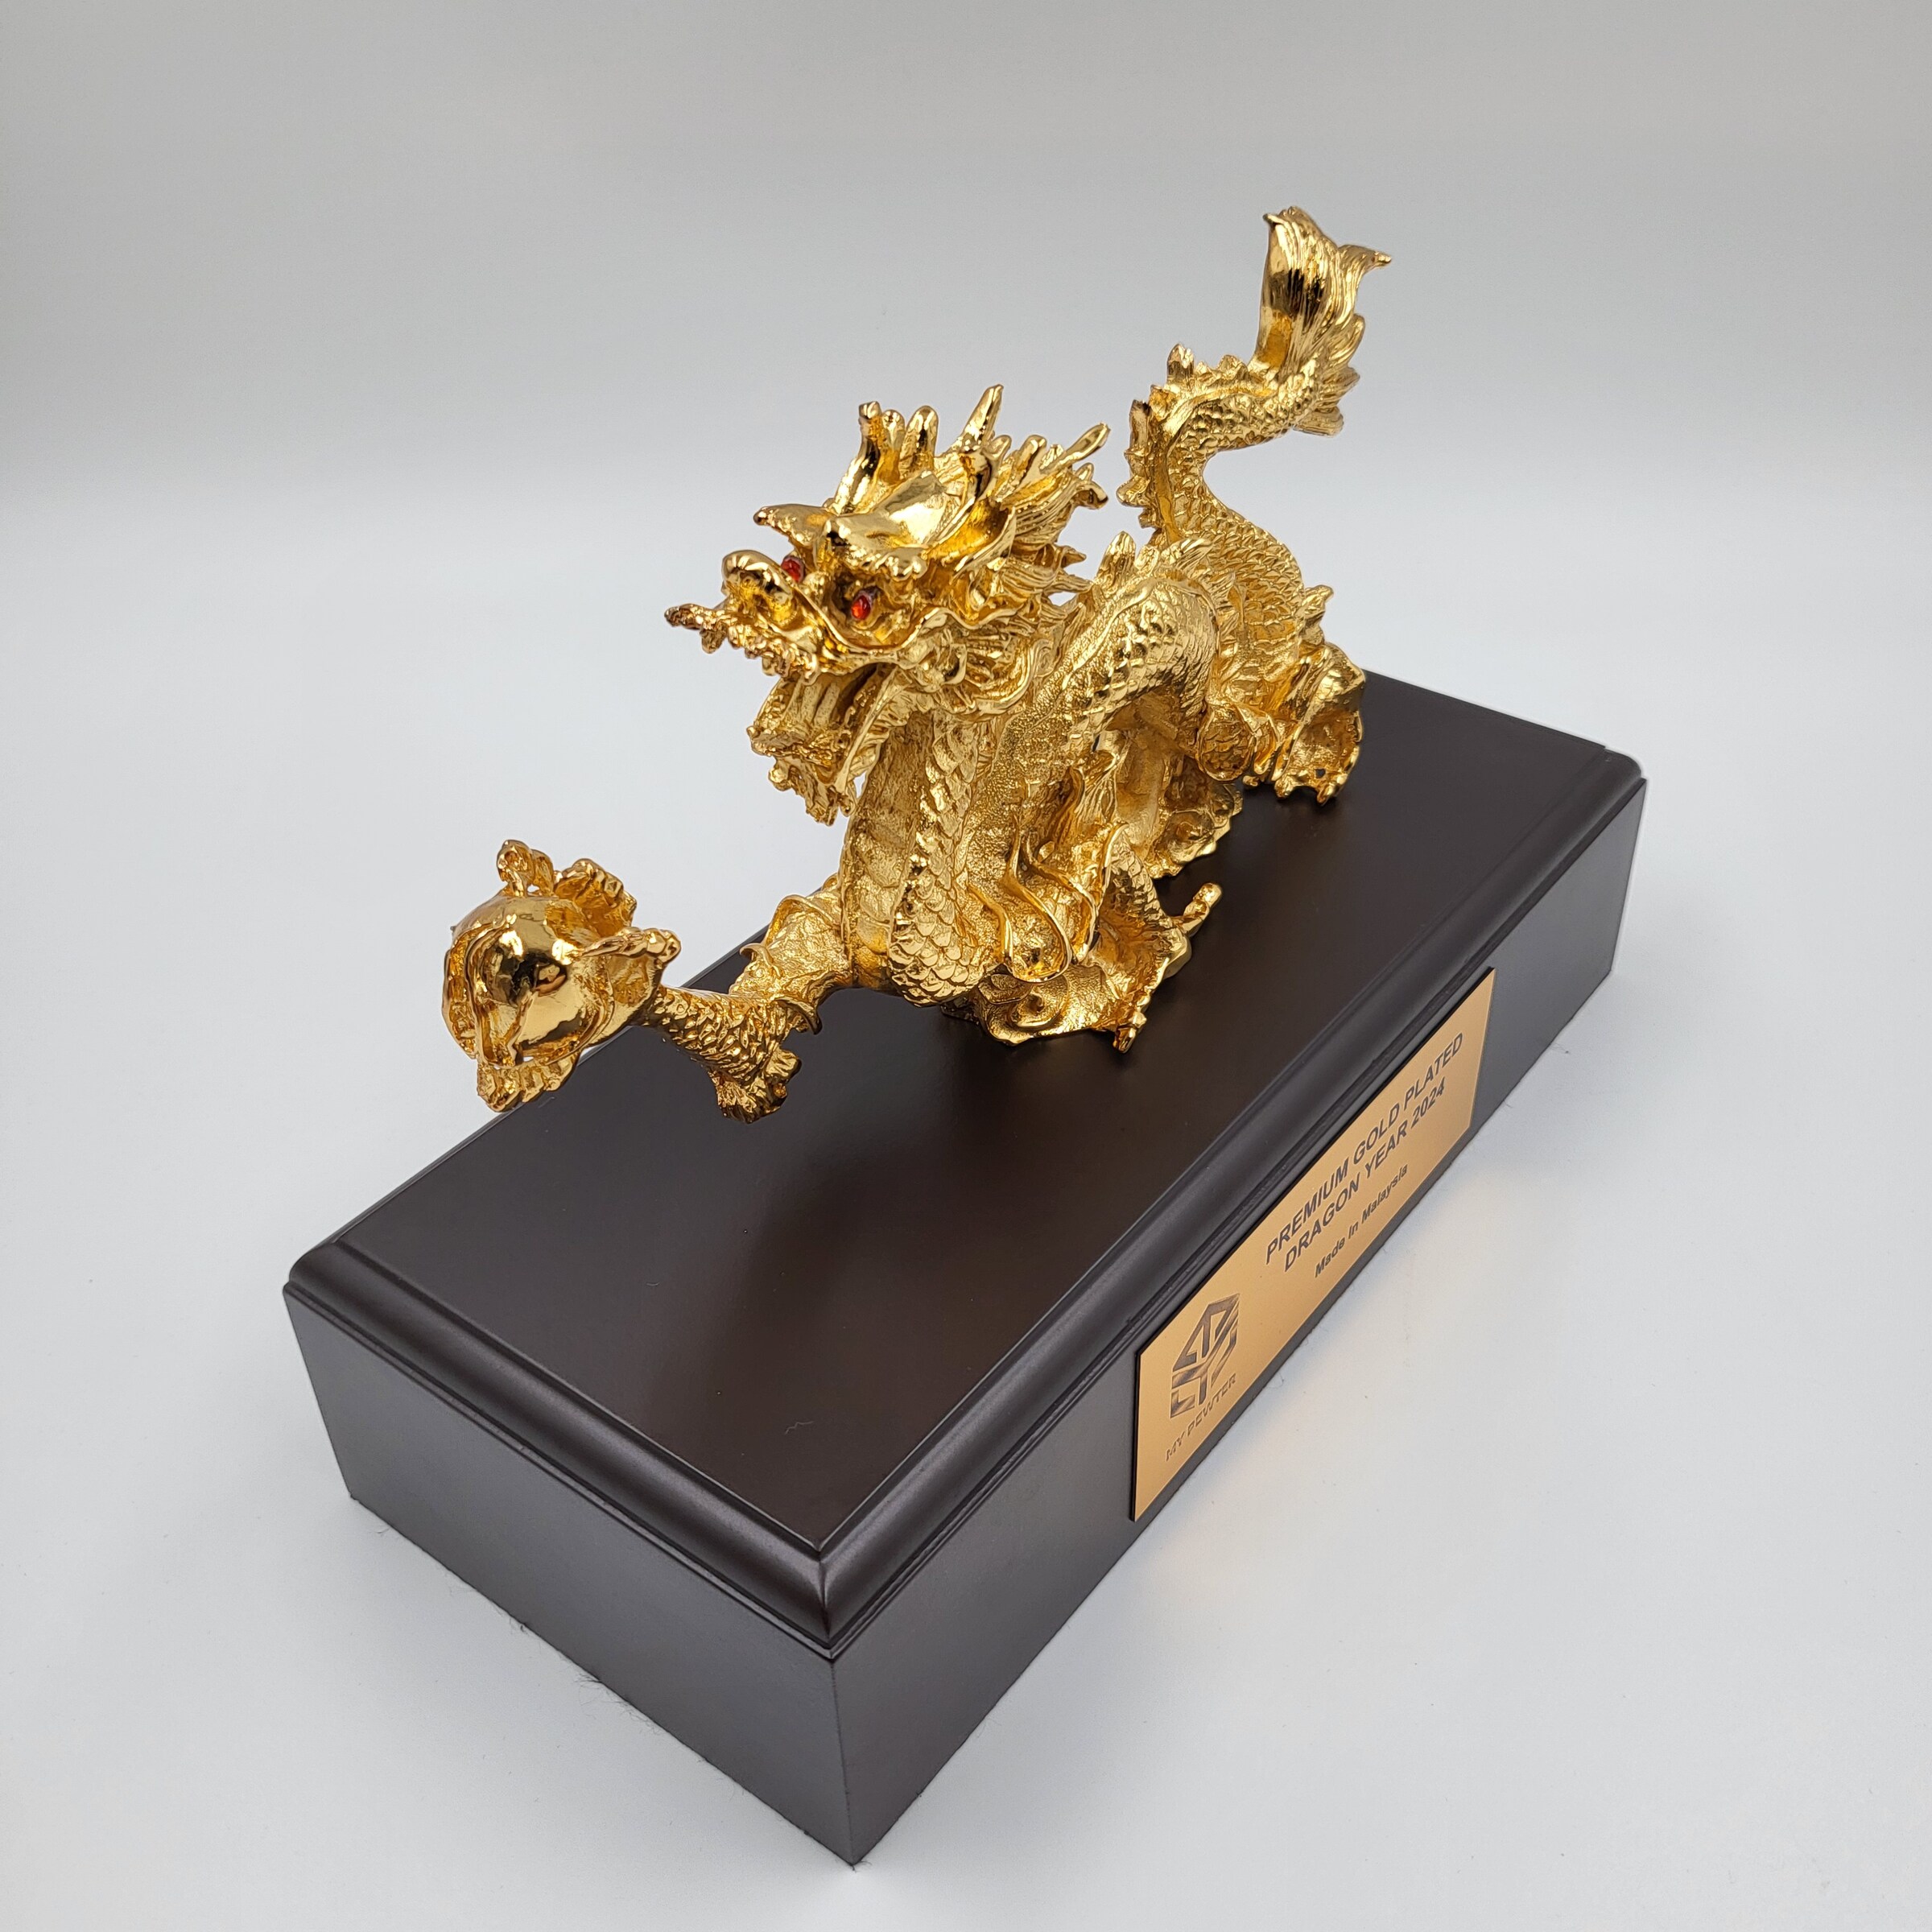 Premium Gold Plated Pewter Dragon Figurine with Wood Base 1